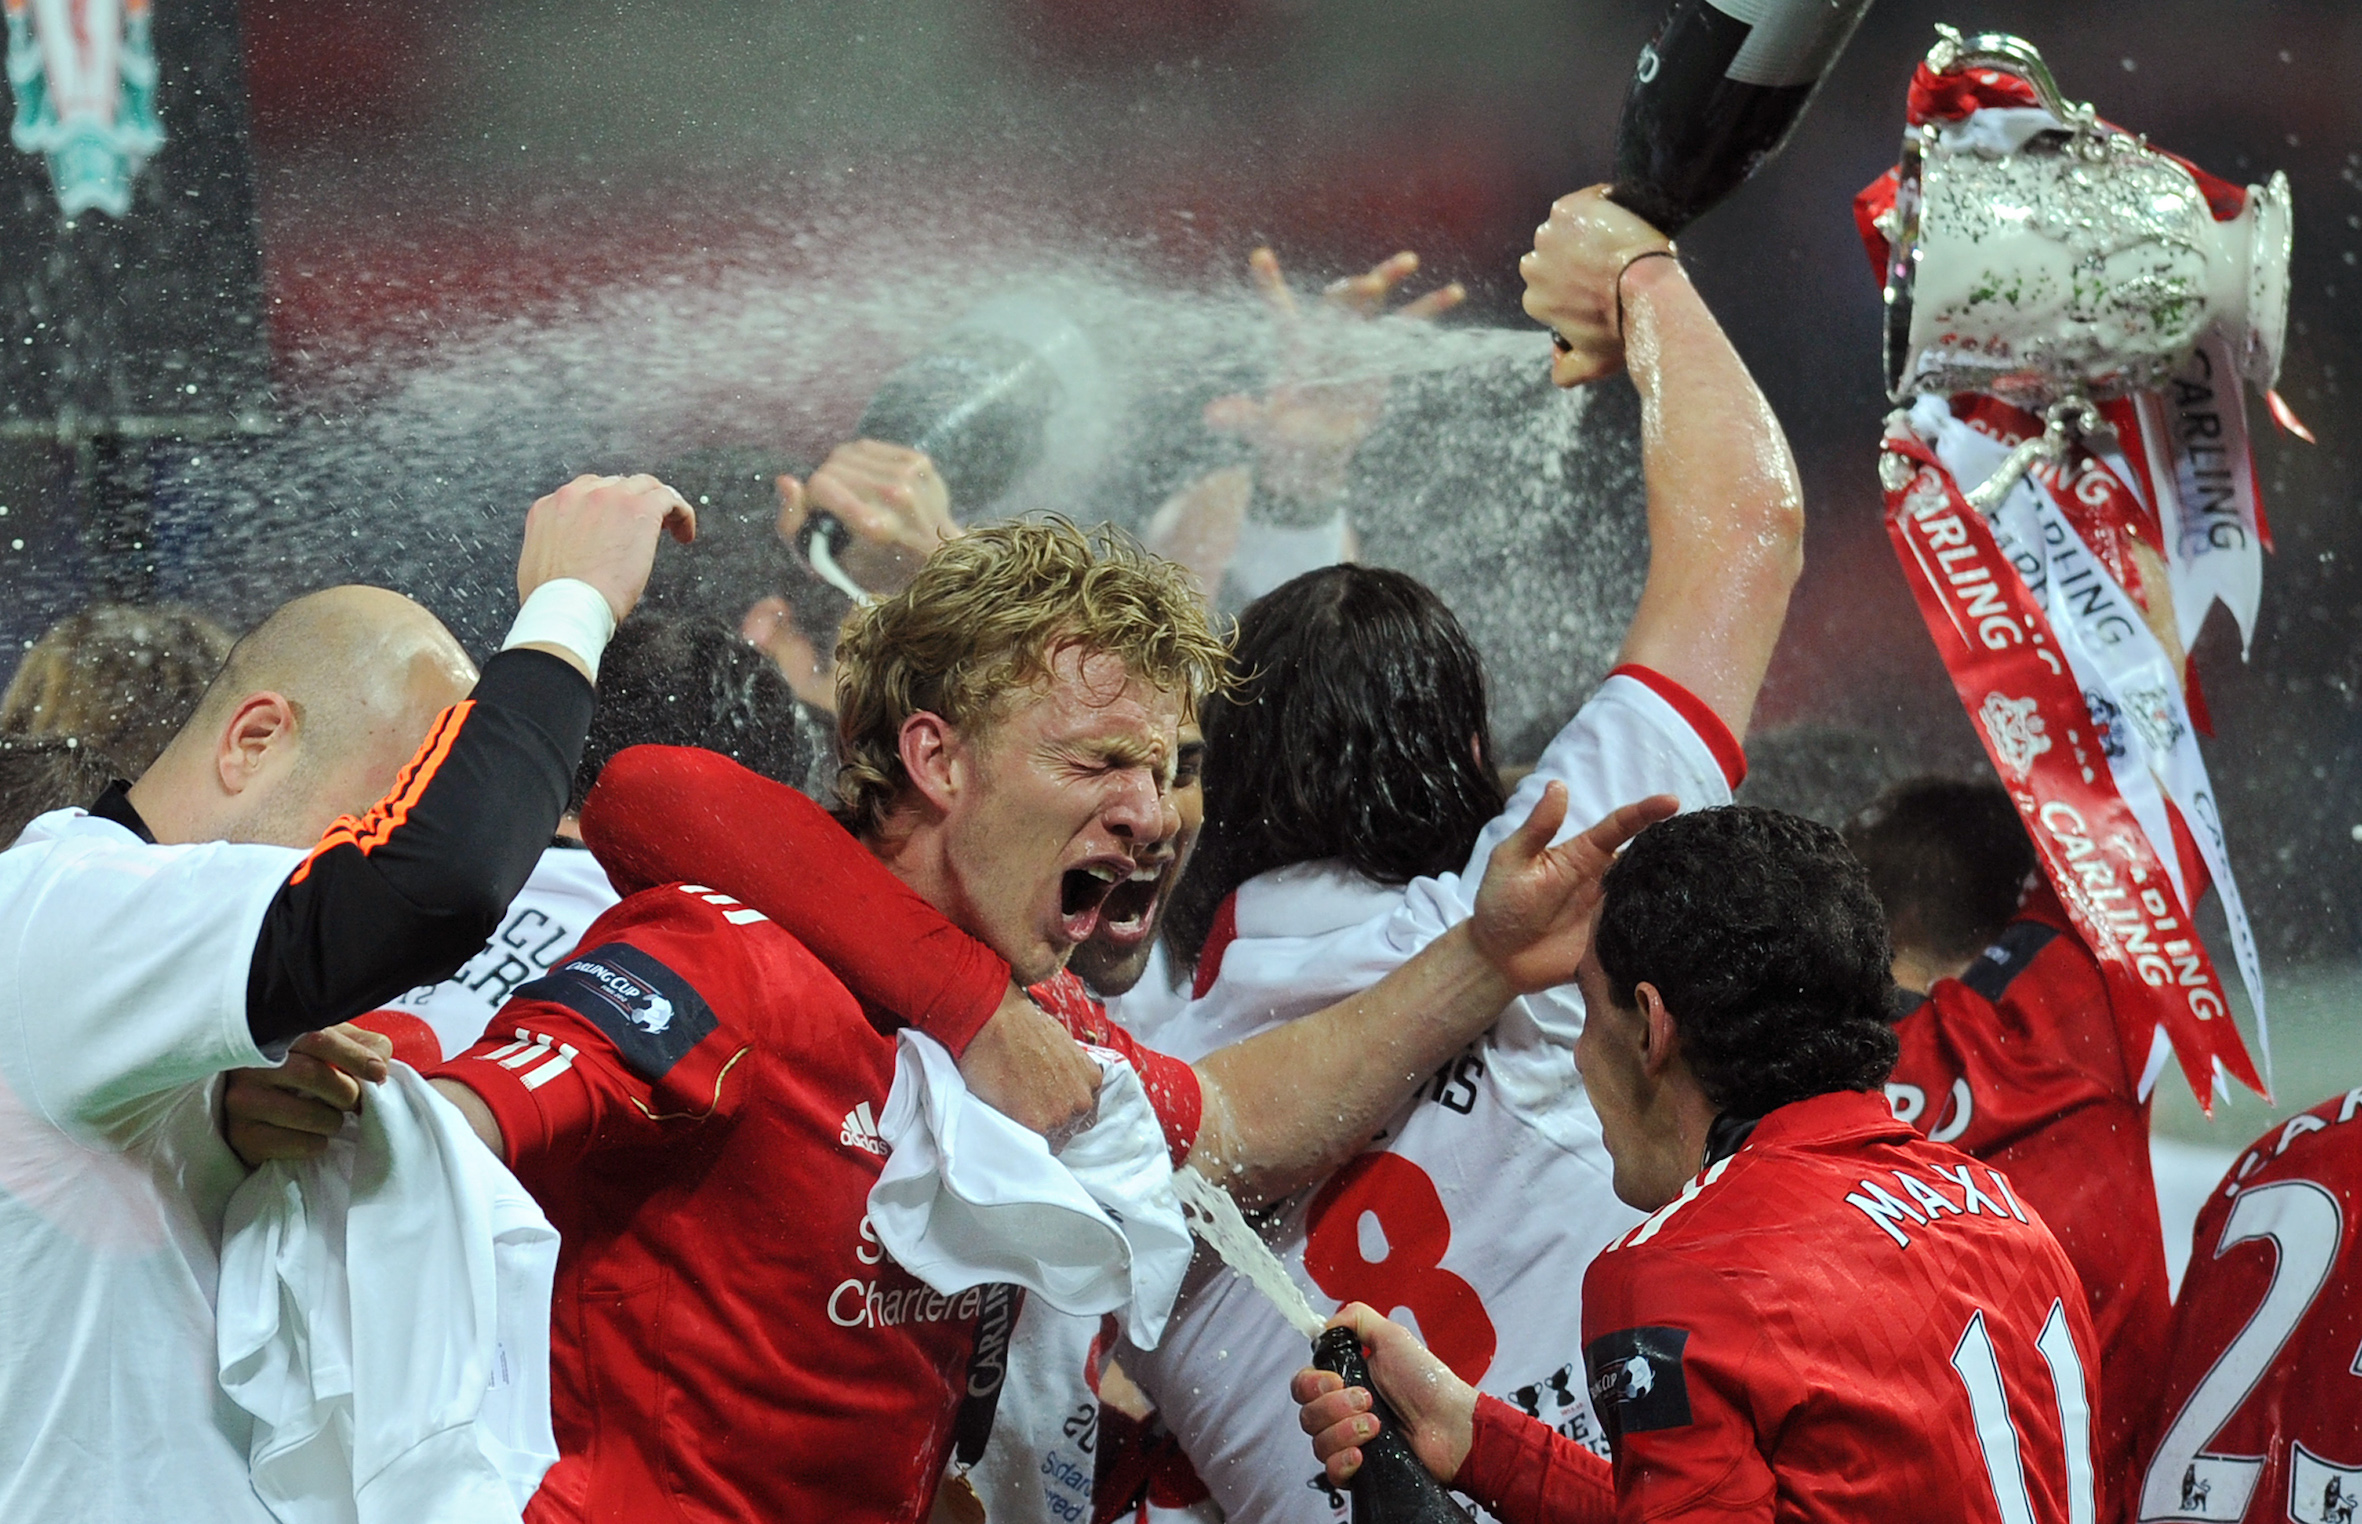 Dirk Kuyt describes the League Cup as a ‘rare competition’ as Liverpool prepare for semi-final clash with Arsenal